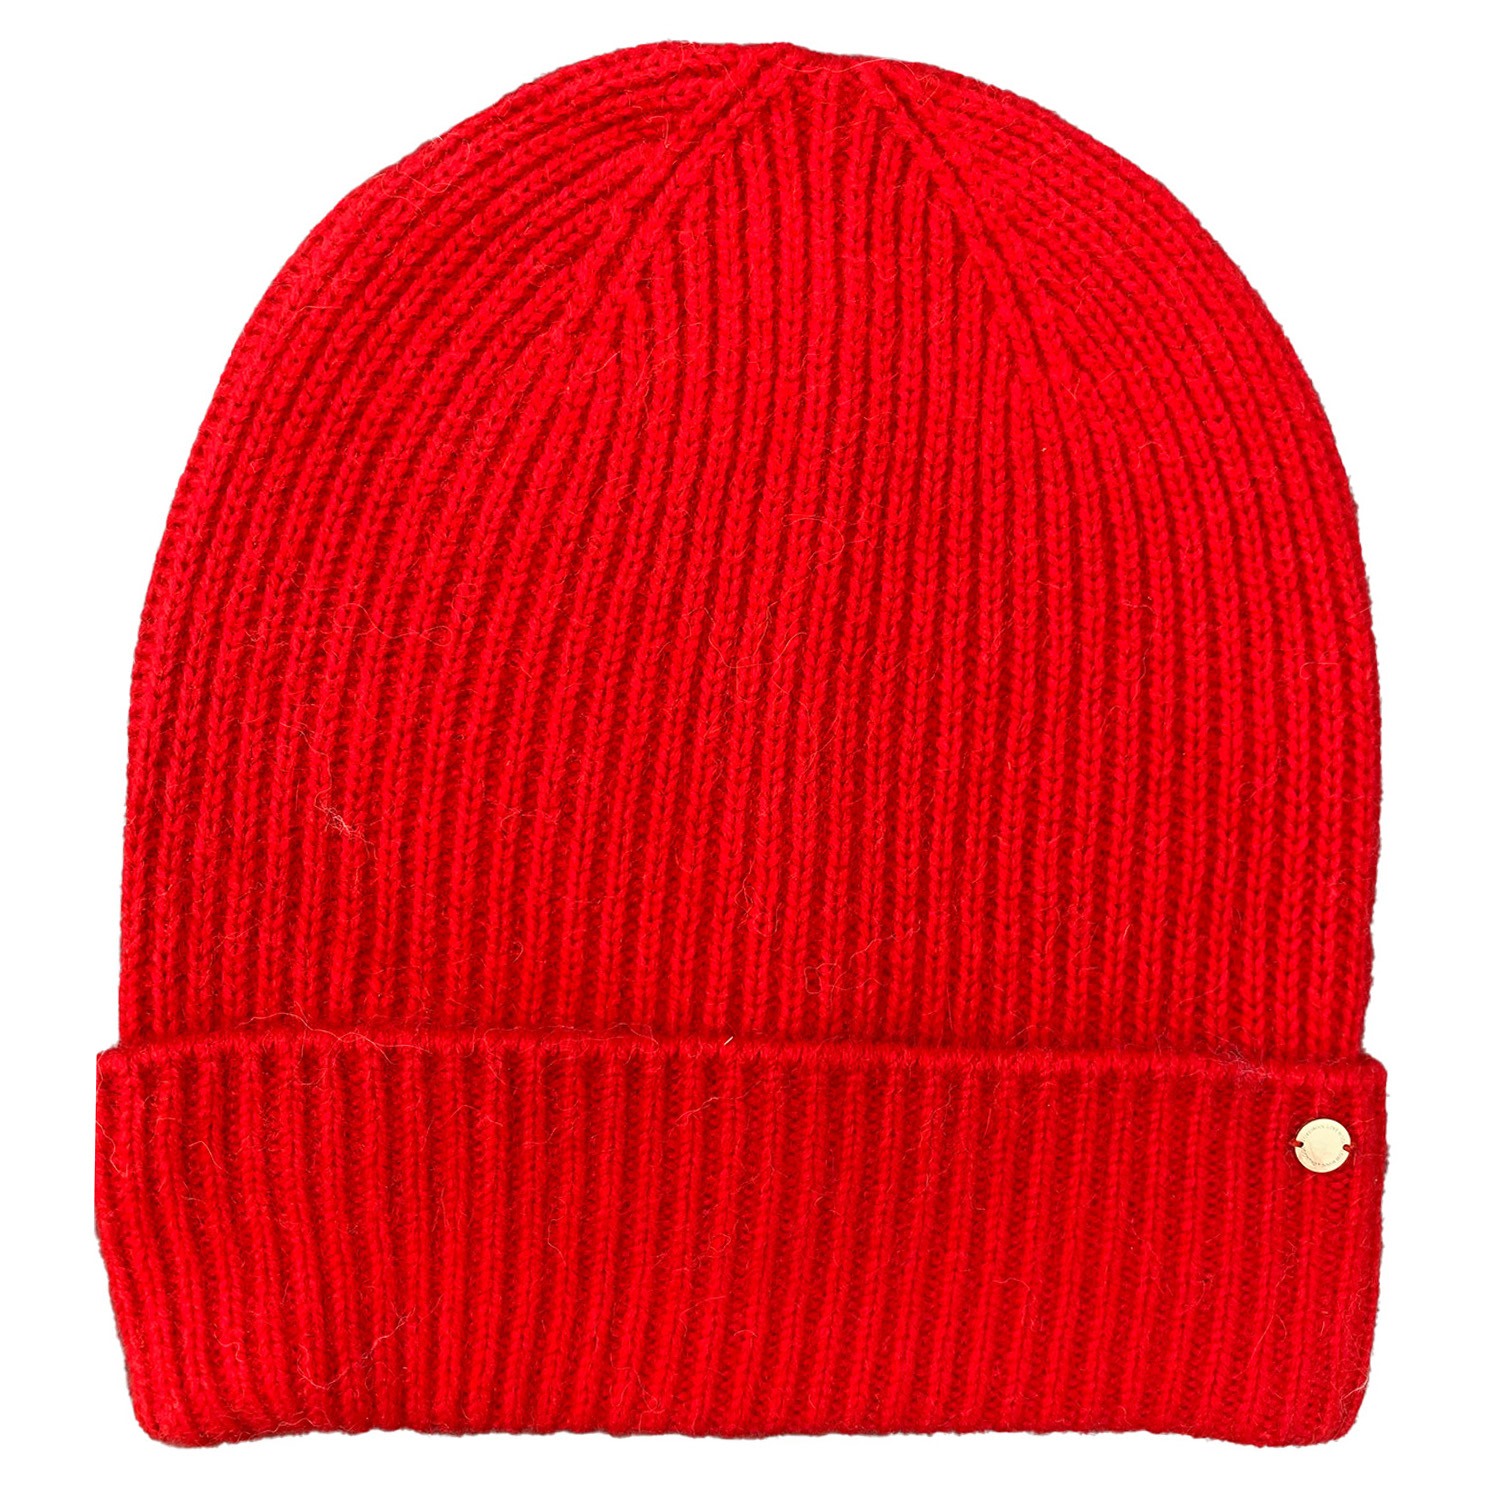 Women’s "Holly" Rib Knitted Cashmere Hat - Red One Size Tirillm